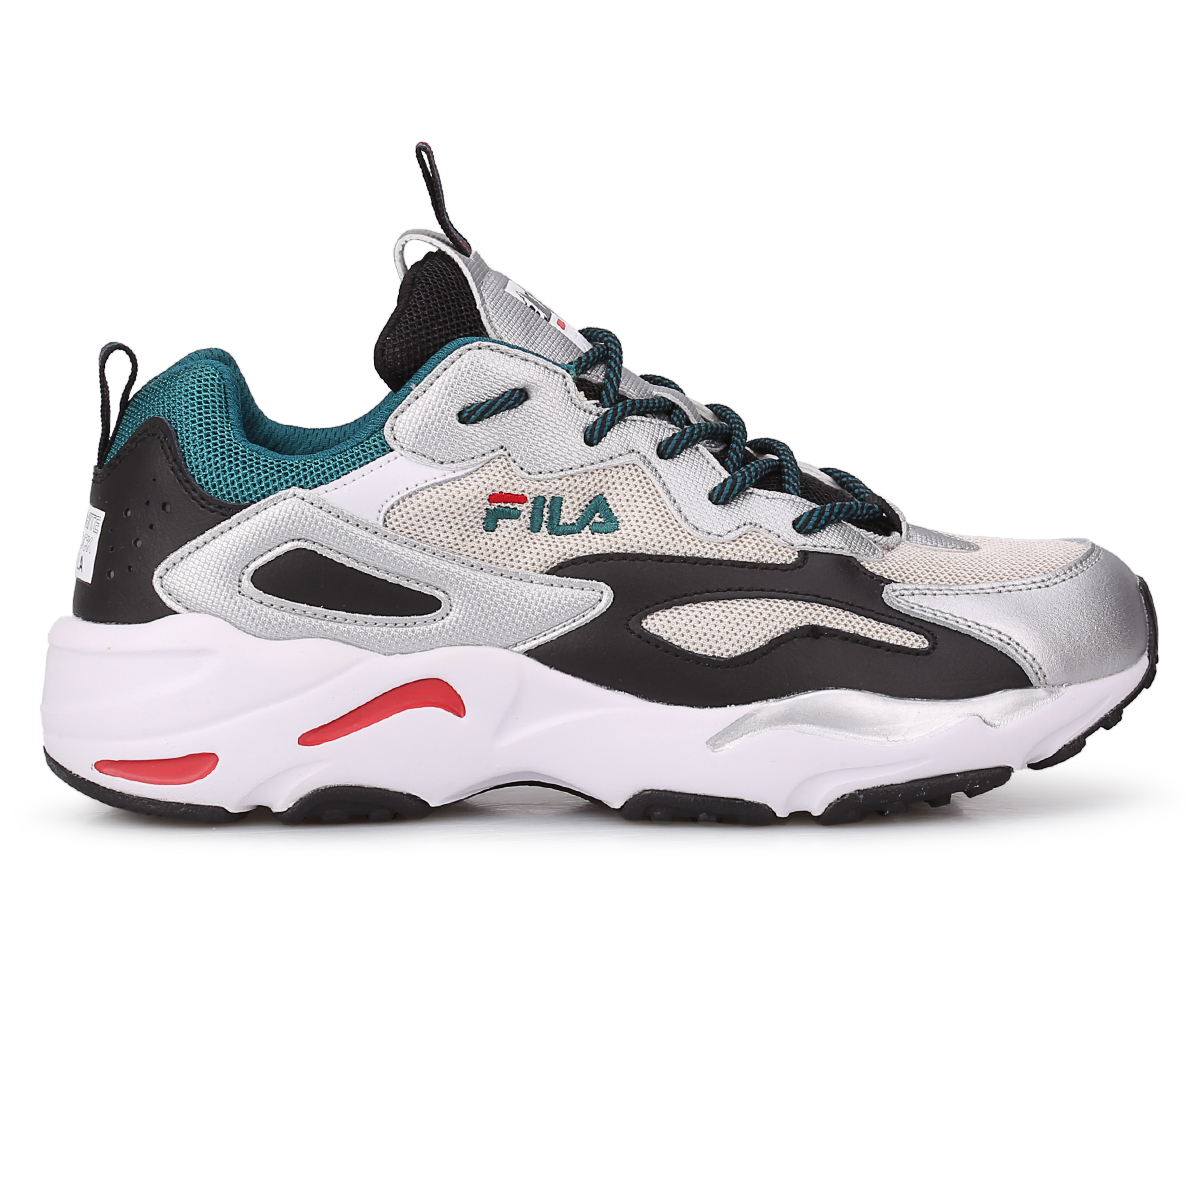 Zapatillas Fila Ray Tracer WRF,  image number null